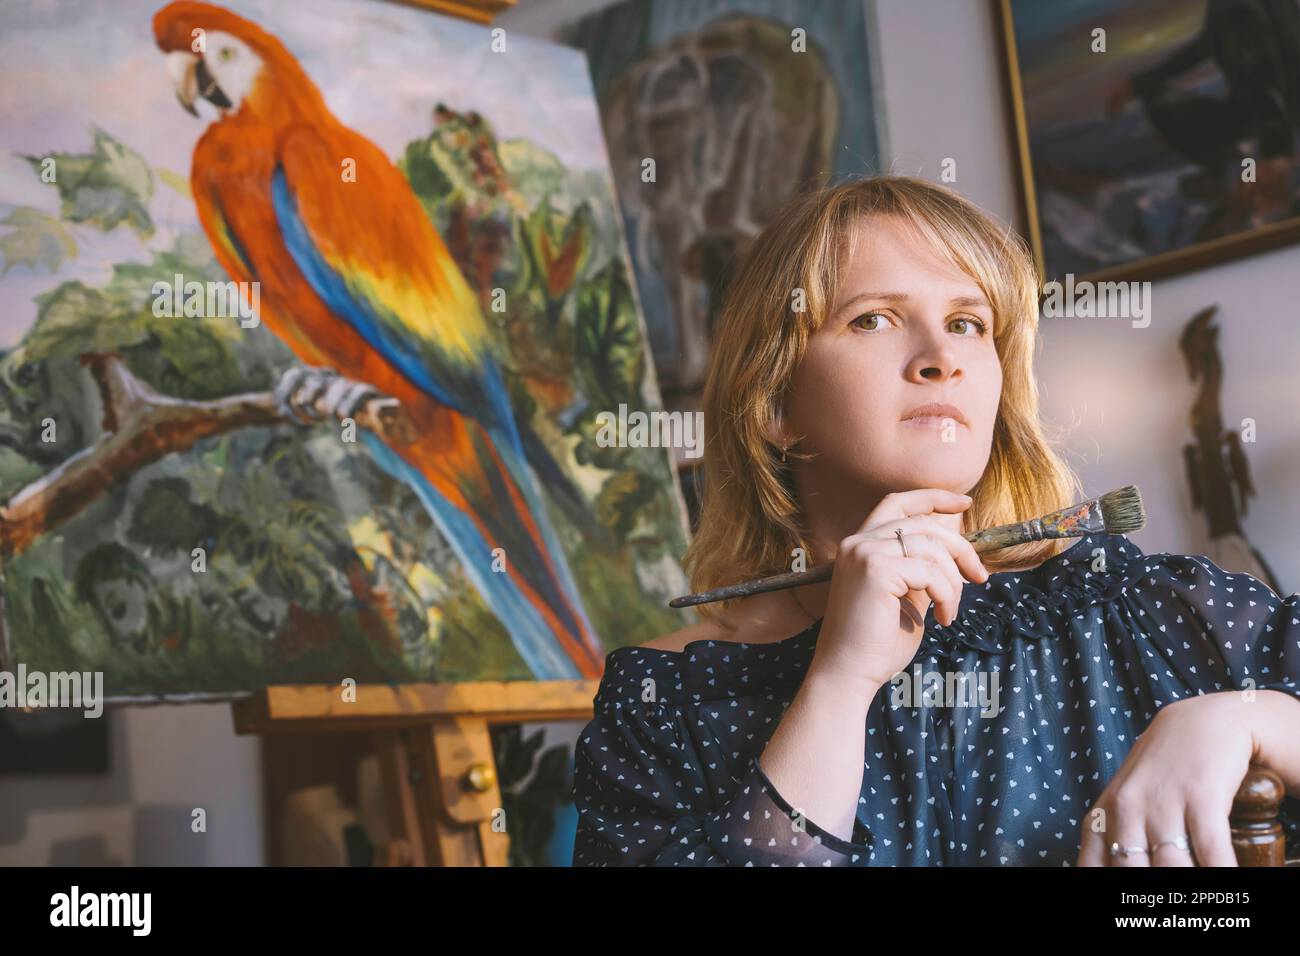 Painter holding paintbrush in front of bird painting Stock Photo